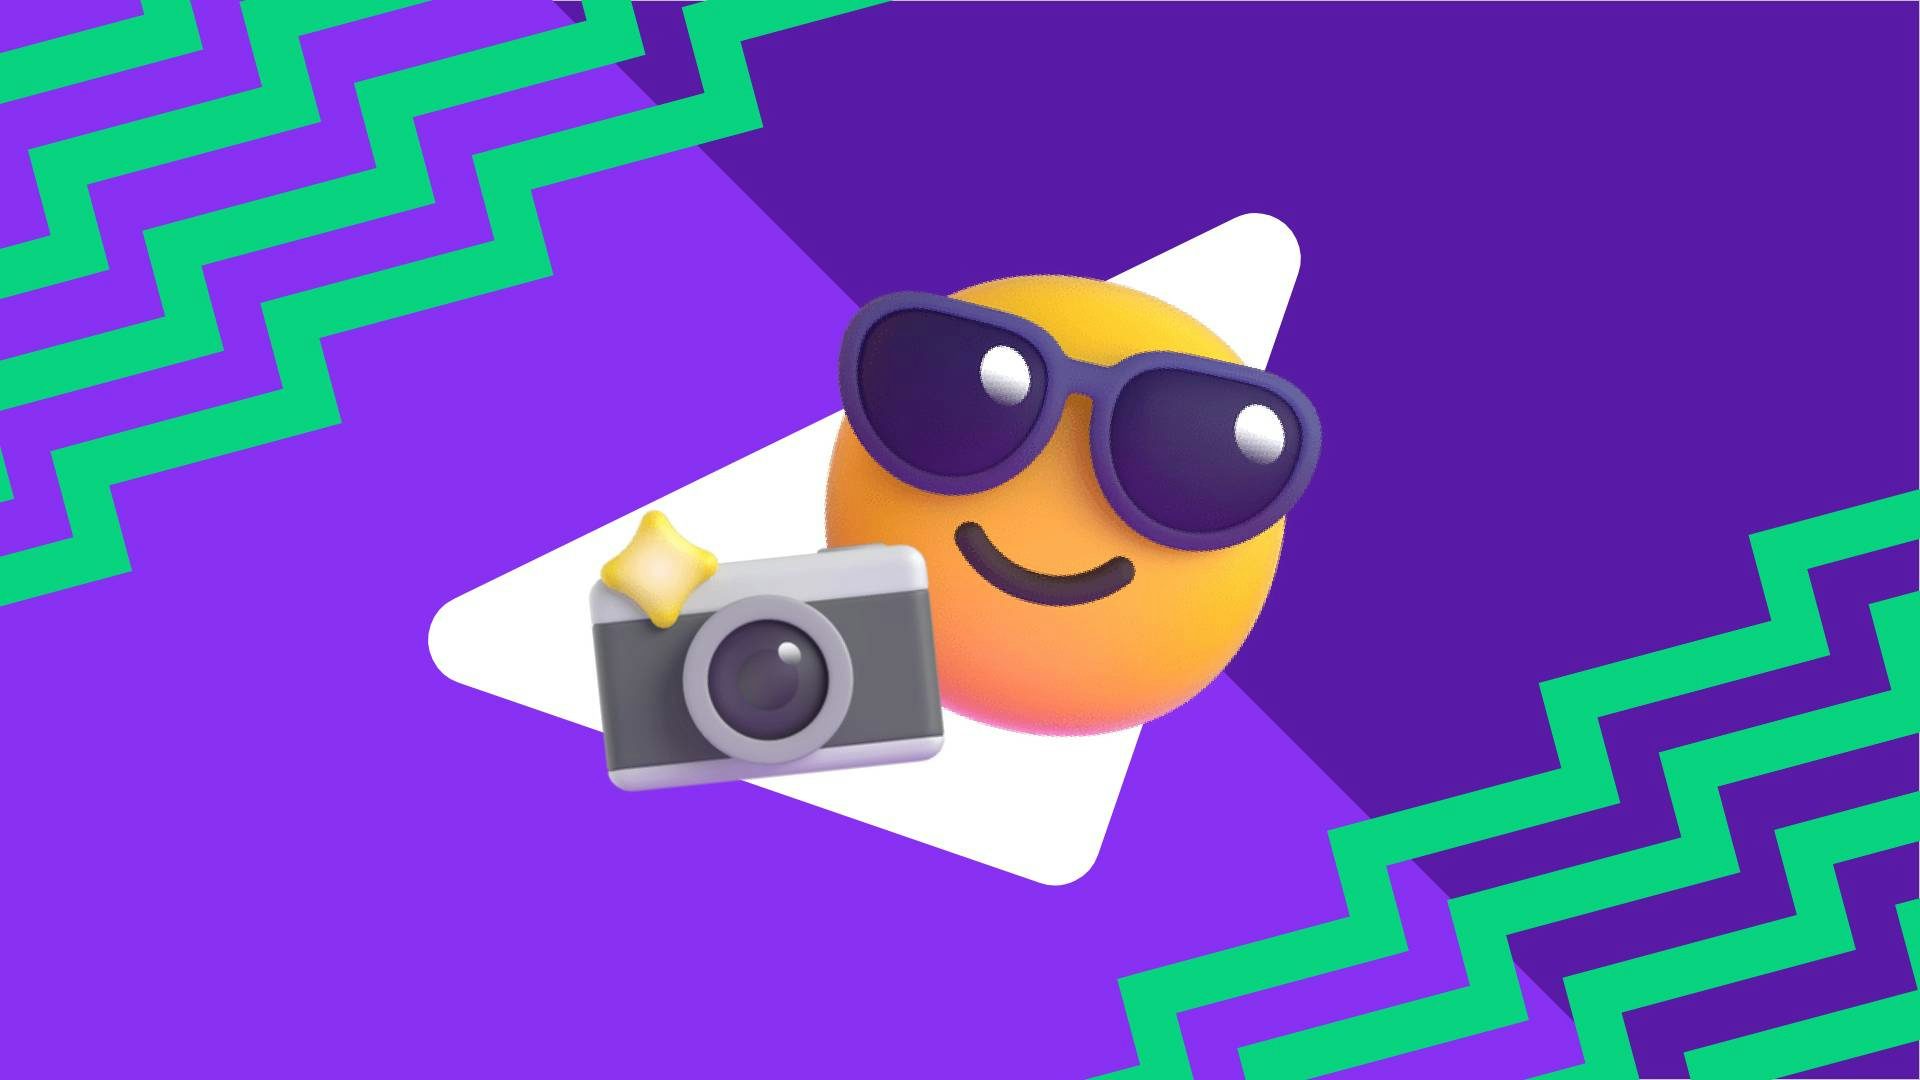 Share your coolest photo or video from EGX 2023 for $3!